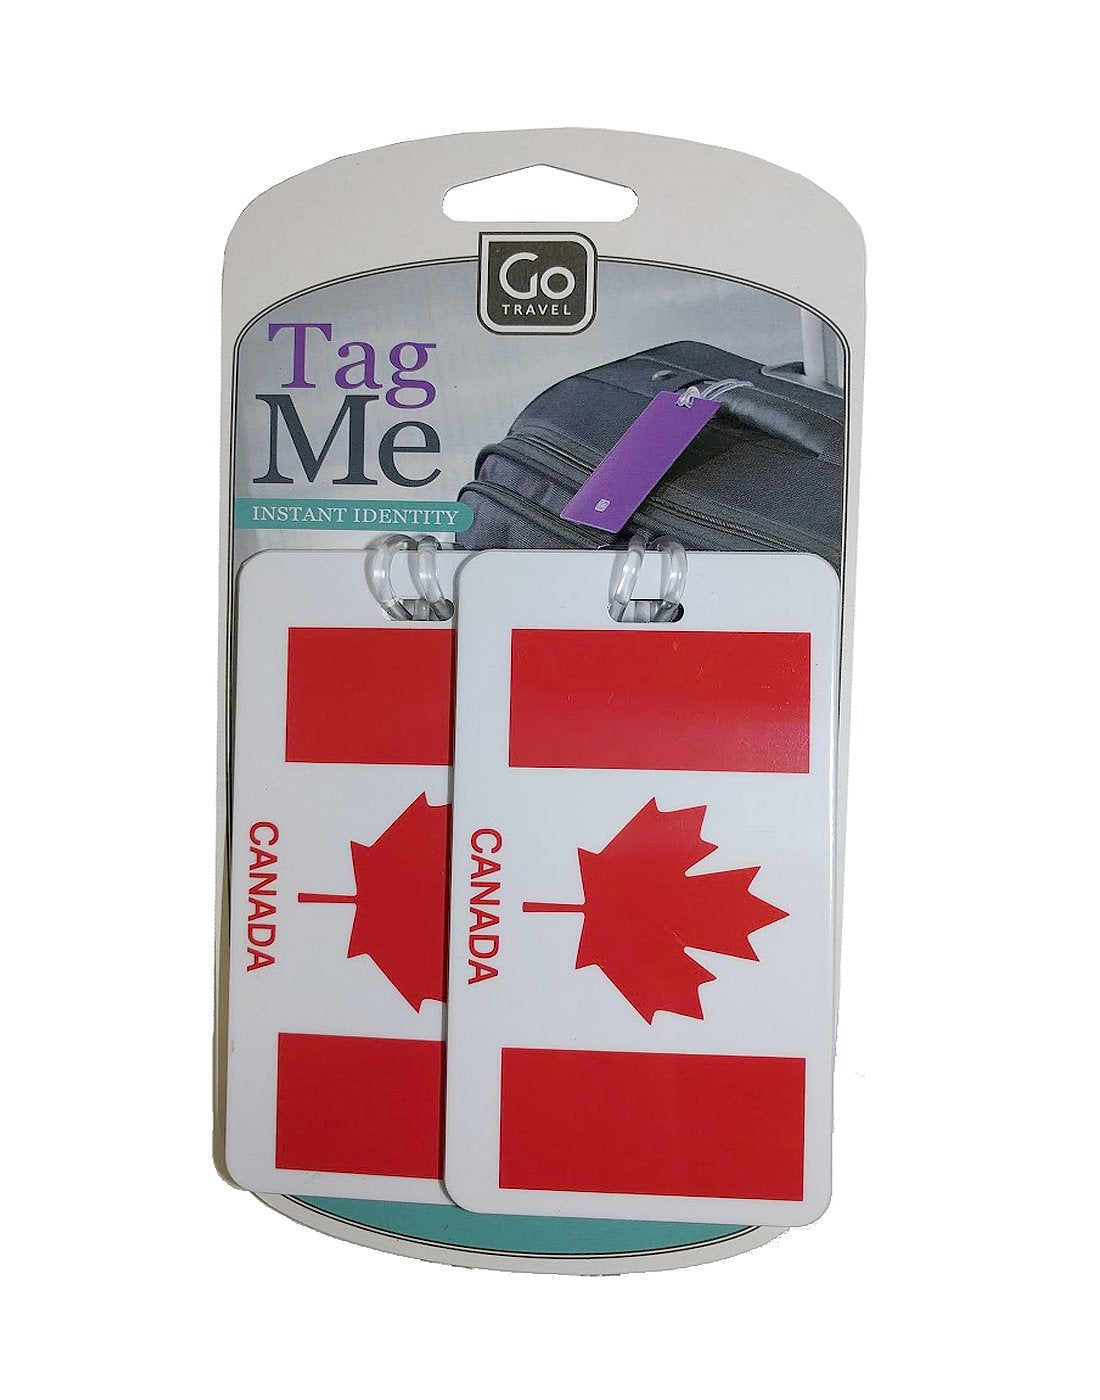 Go Travel Tag Me Luggage Tags 2 Pack